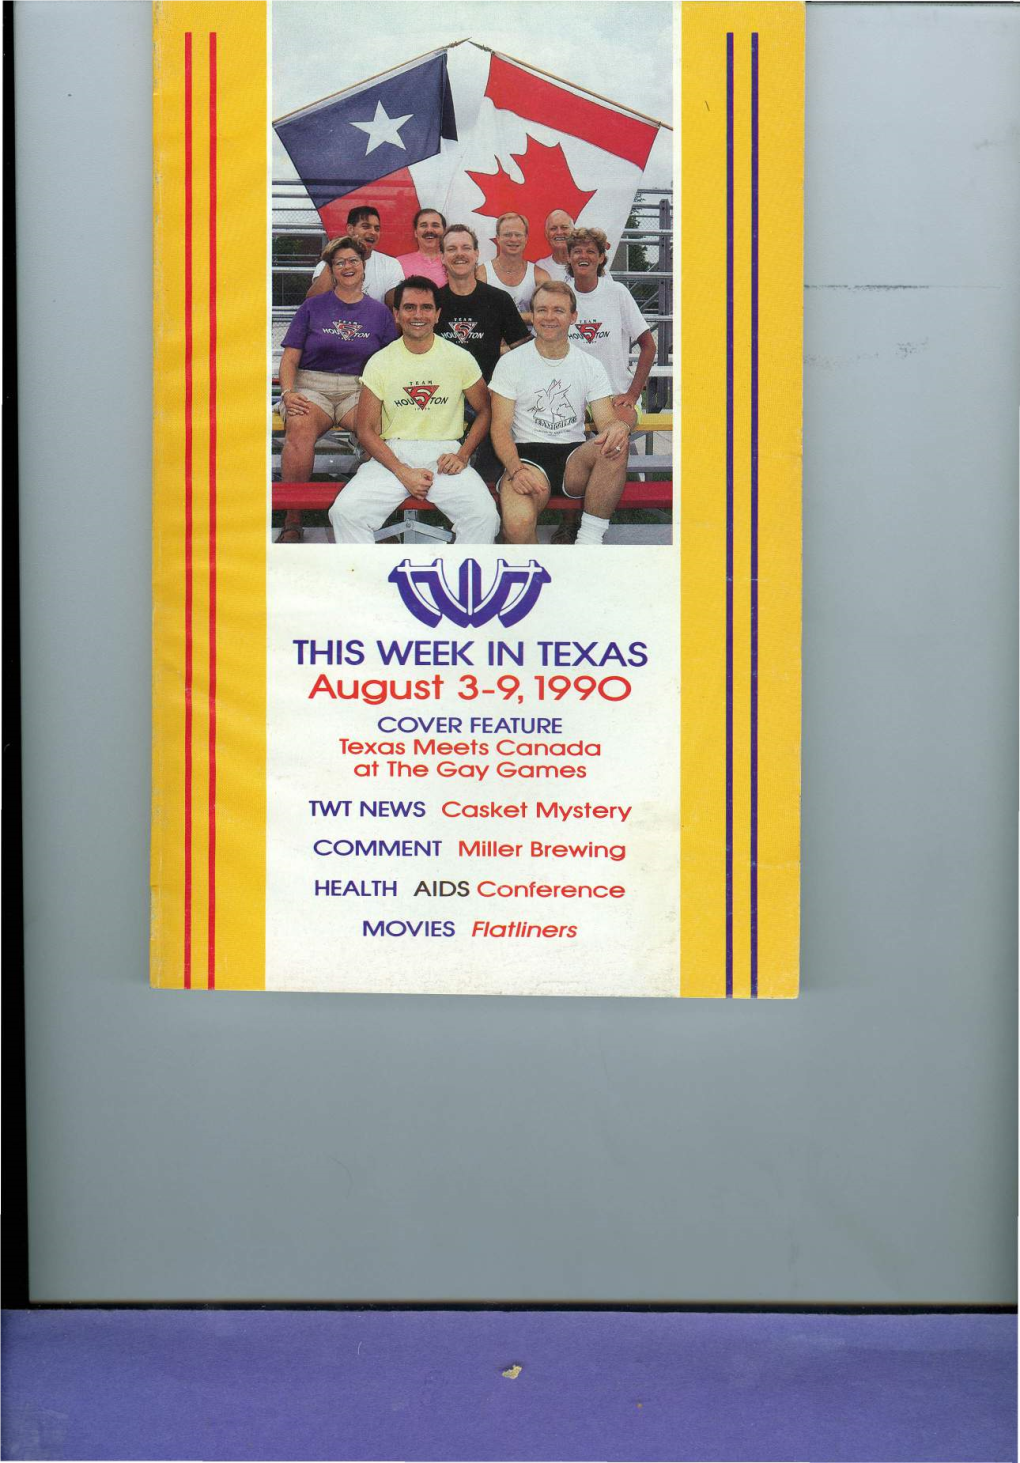 August 3-9, 1990 COVER FEATURE Texas Meets Canada at the Gay Games